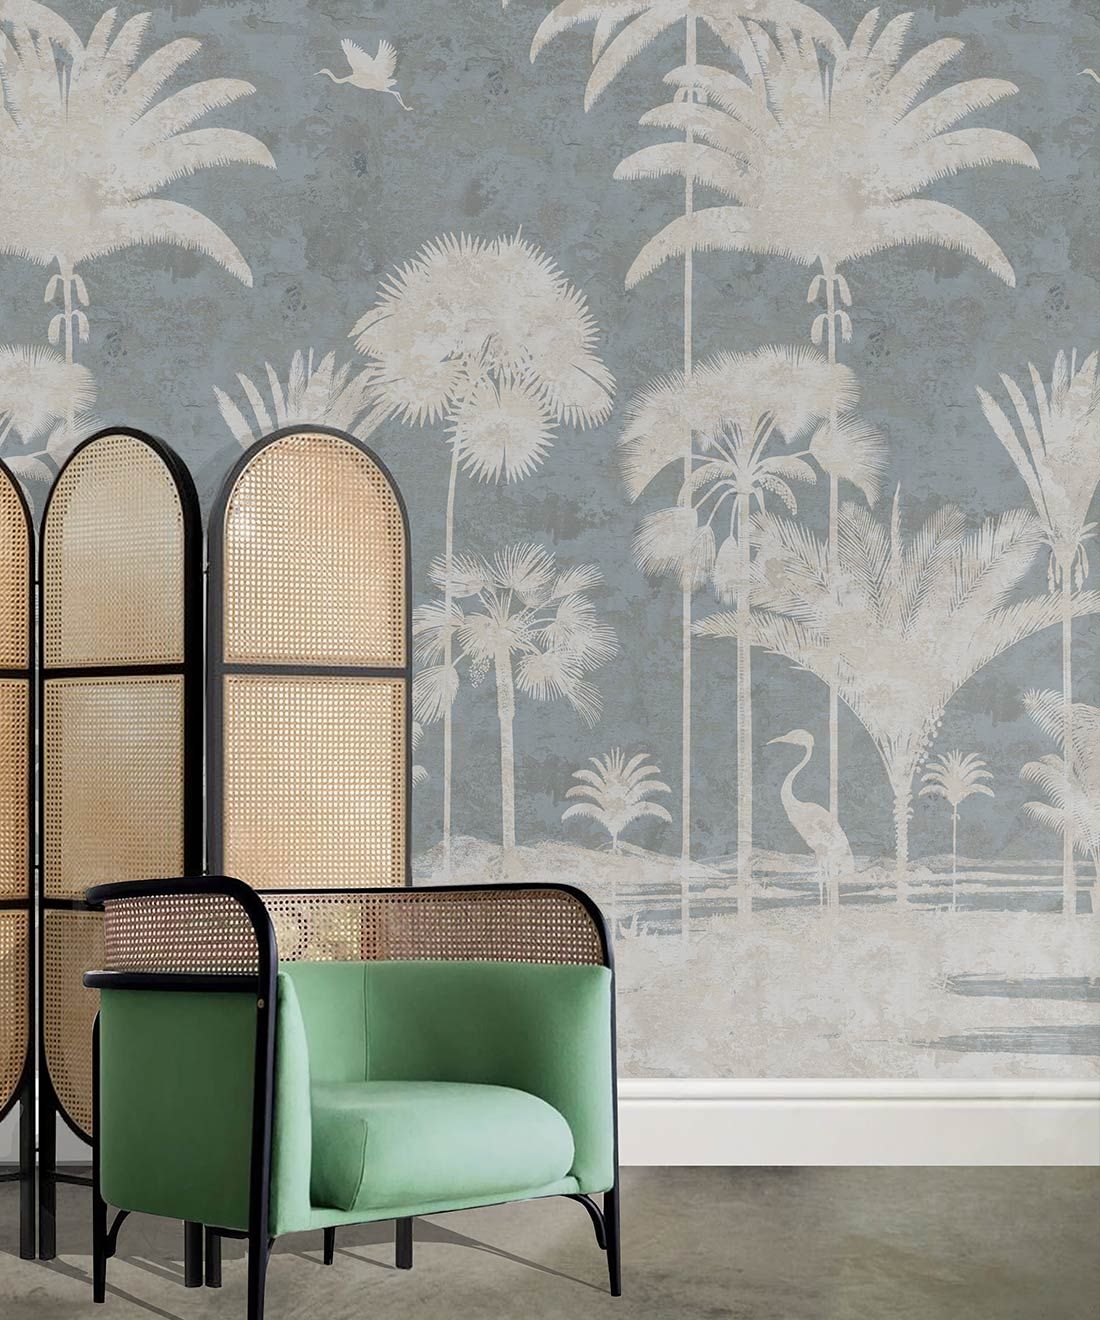 Shadow Palms Wallpaper Mural •Bethany Linz • Palm Tree Mural • Blue • Insitu with mint green chair